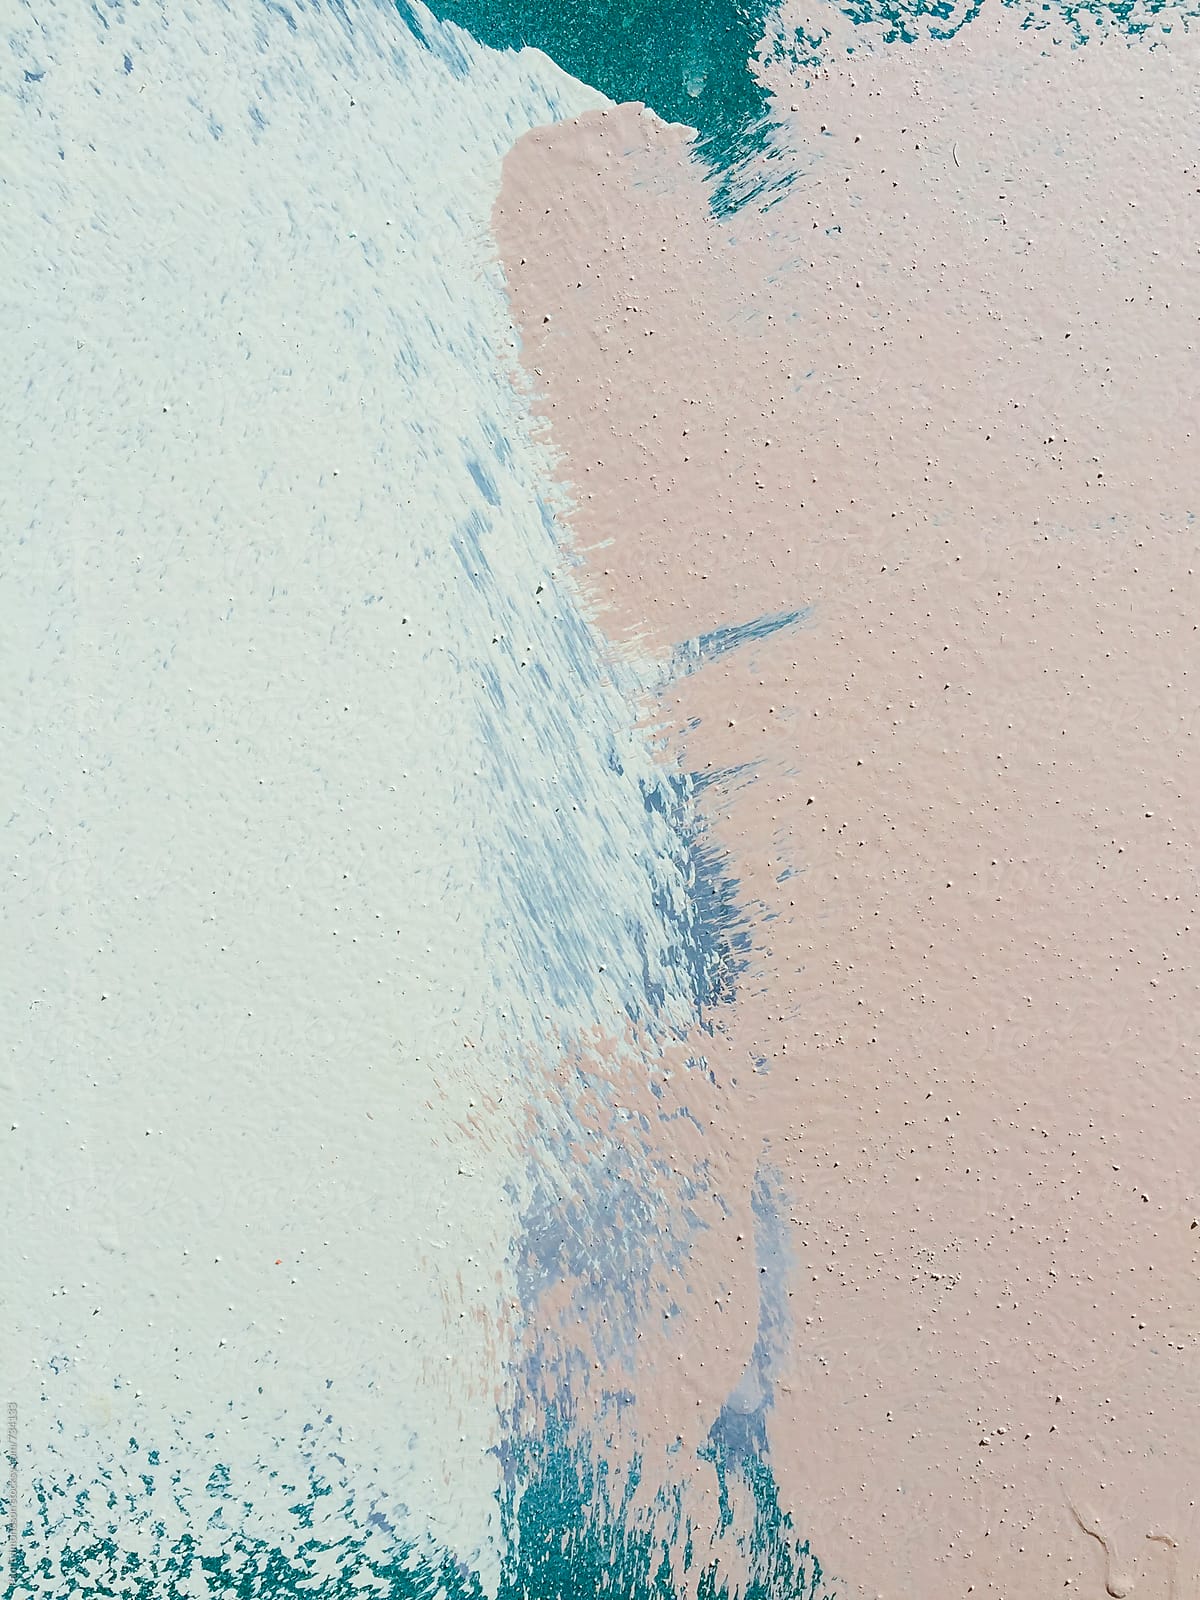 Detail of paint covering graffiti tags on metal wall